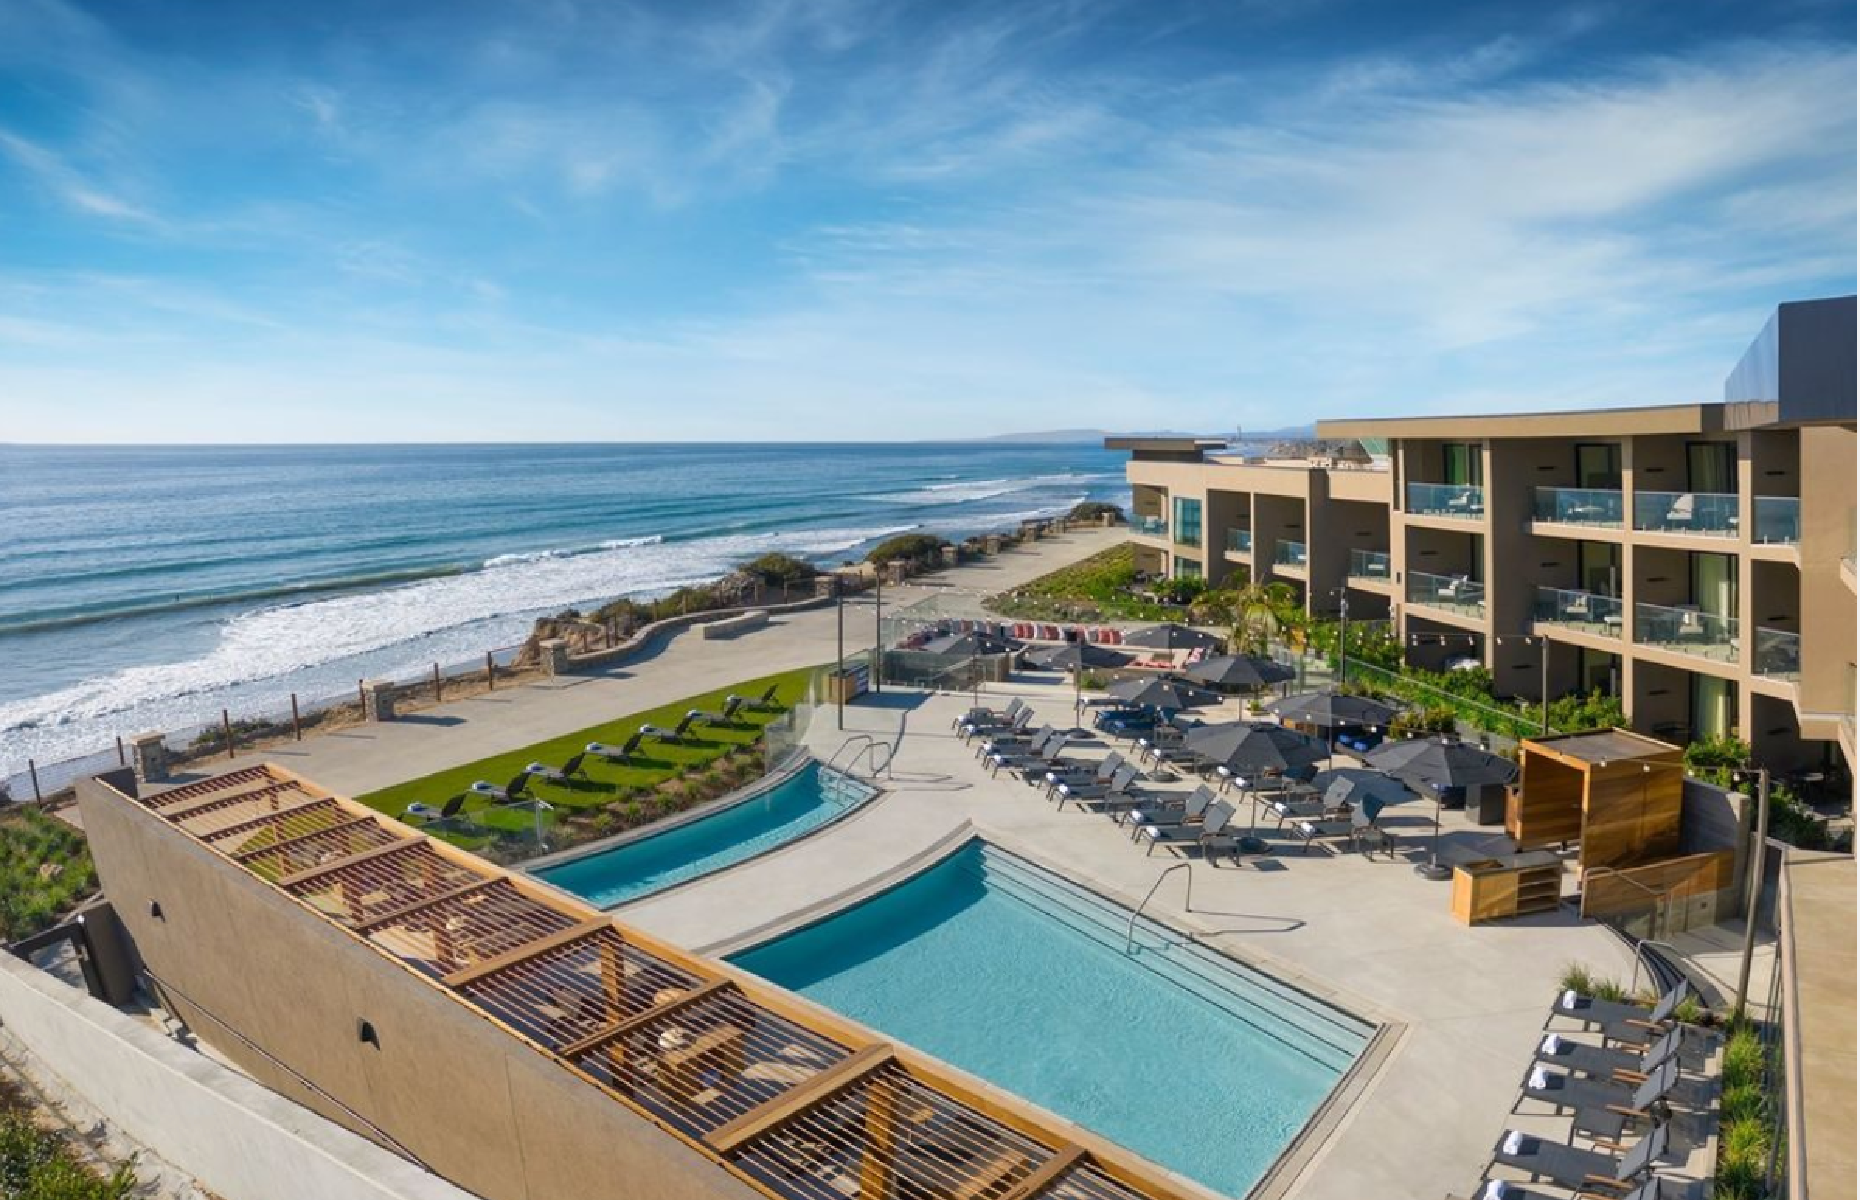 <p>This resort just north of San Diego is all about living that classic southern California beach lifestyle. The hotel overlooks South Ponto State Beach, which is a public beach, but <a href="https://www.alilahotels.com/marea-beach-resort-encinitas">Alila Marea’s</a> “beach ambassadors” will get guests set up with lounge chairs, umbrellas and everything else they need. Surf lessons are also available, or just enjoy the modern pool area.</p>  <p><strong><a href="https://www.loveexploring.com/galleries/106621/californias-most-beautiful-small-towns-and-cities">Discover California's most beautiful small towns and cities</a></strong></p>